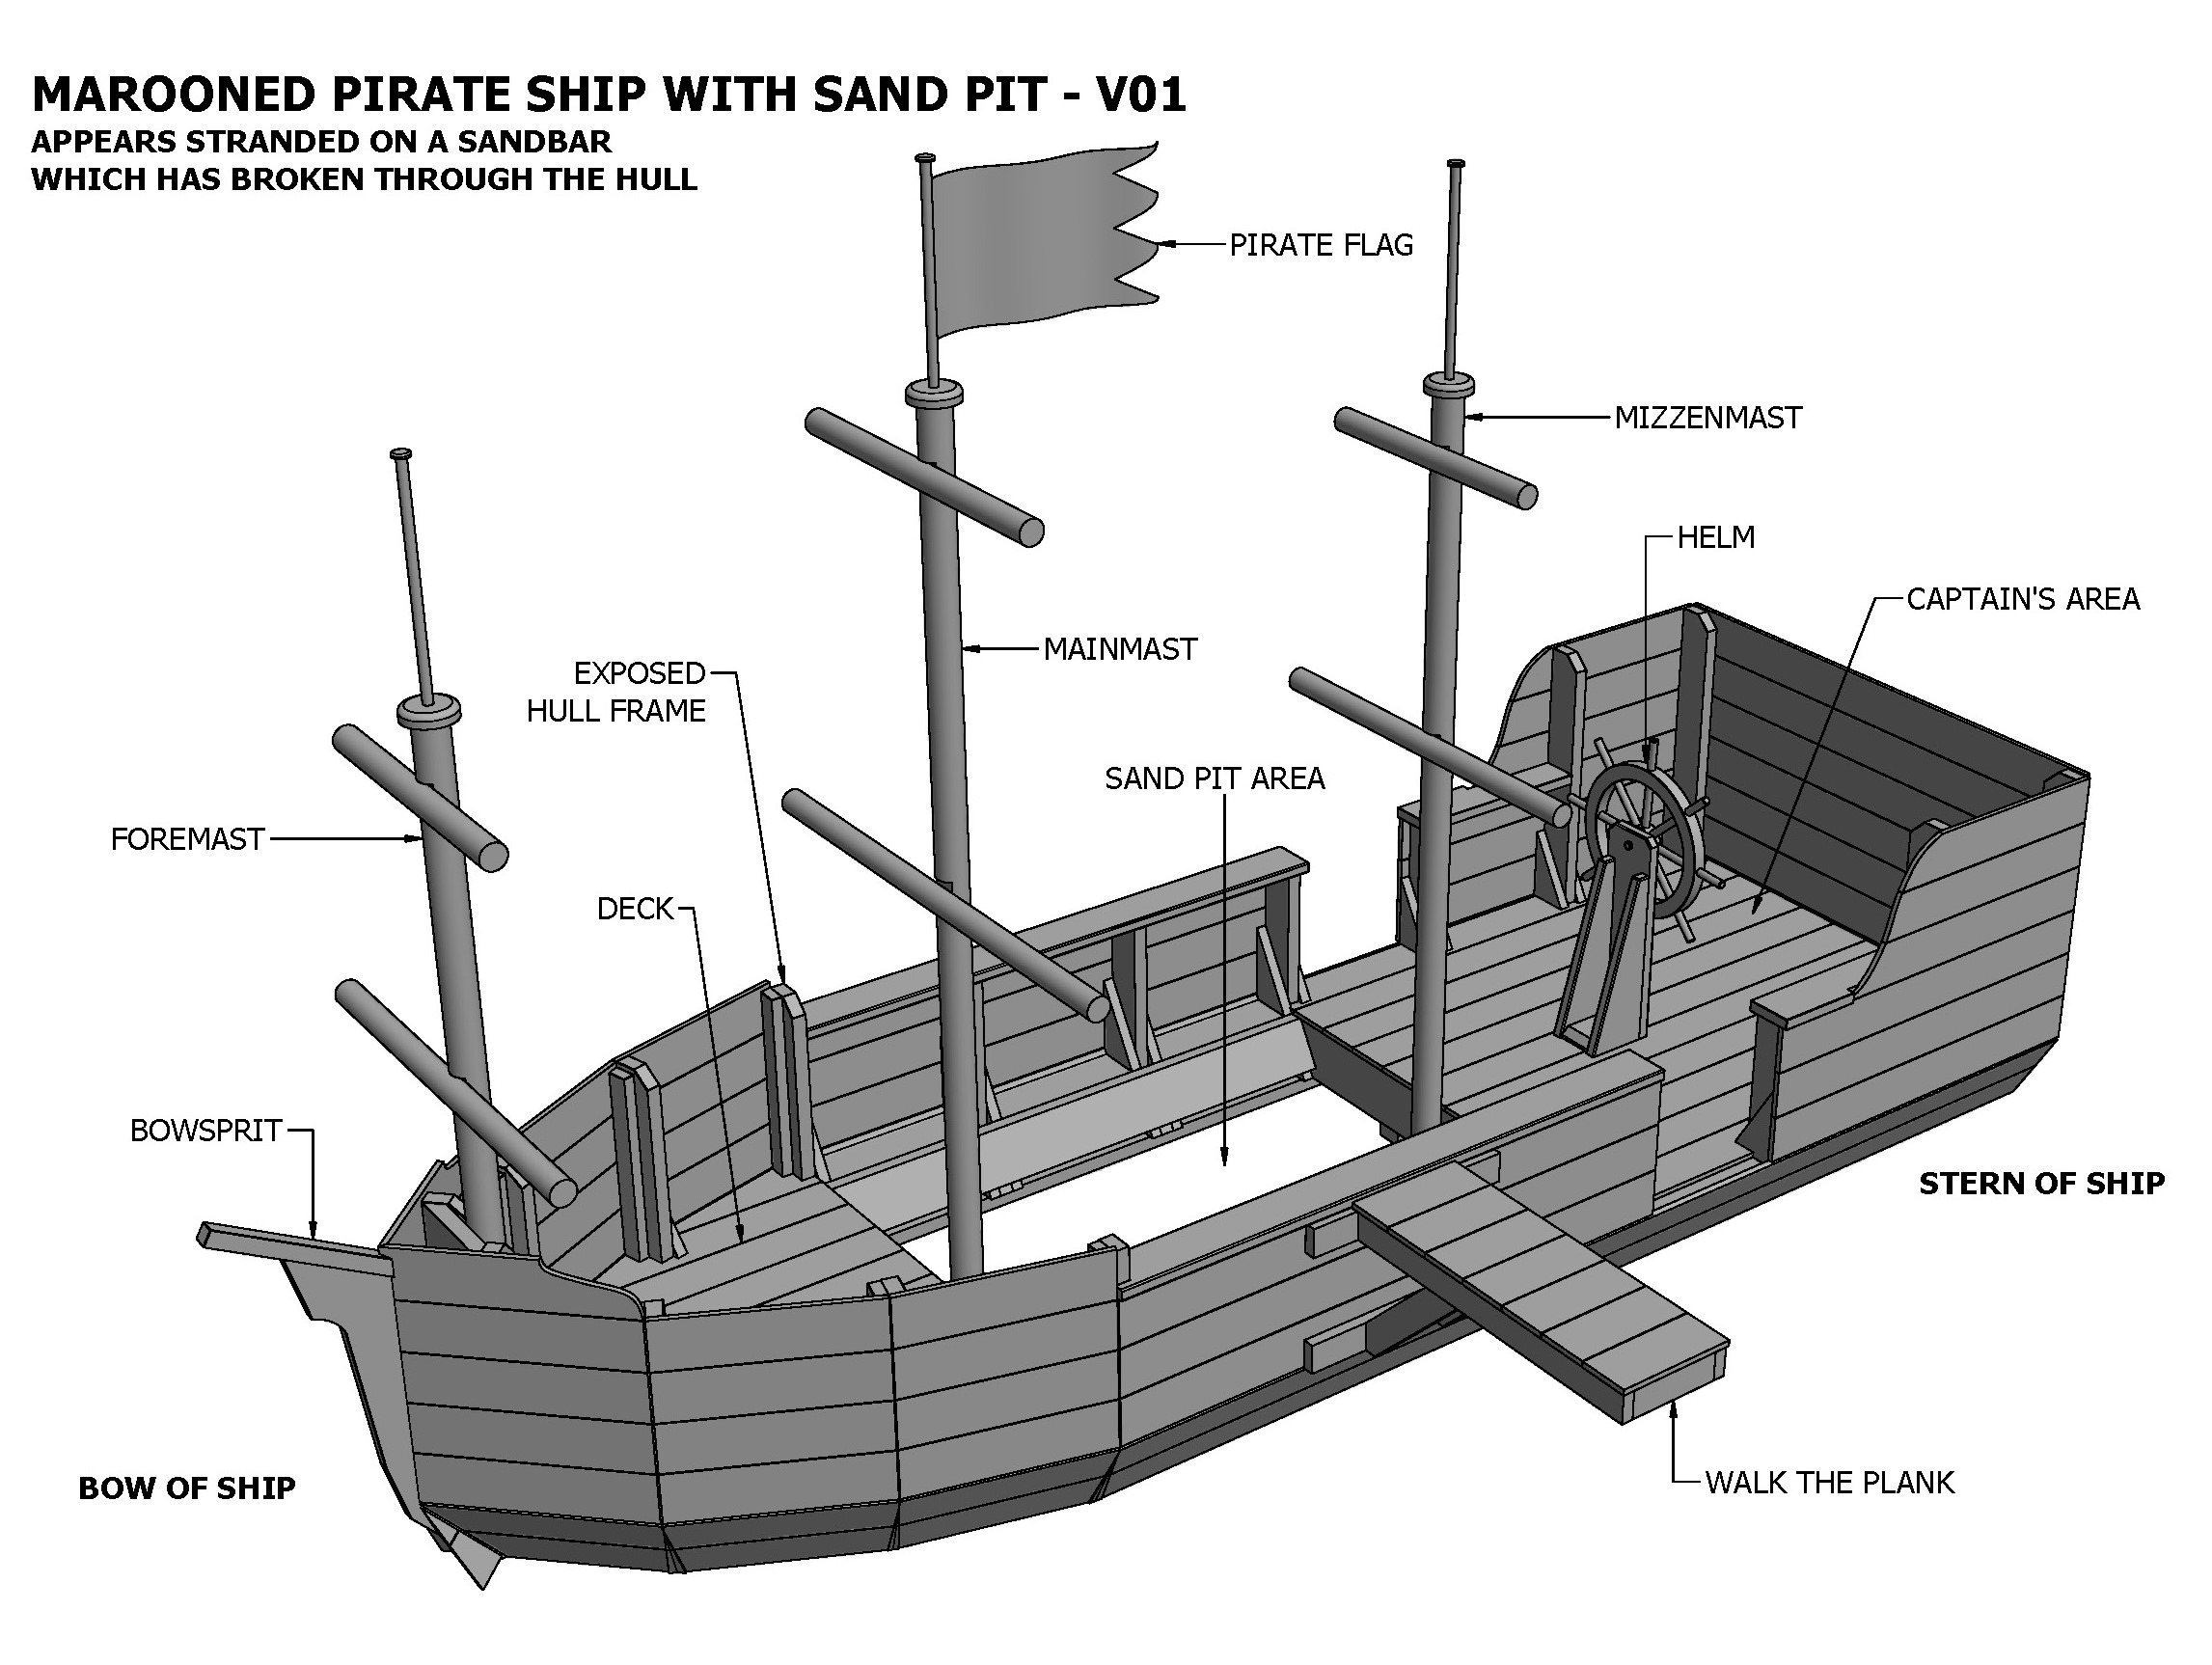 MAROONED PIRATE BOAT V01 with Beached Sand Pit